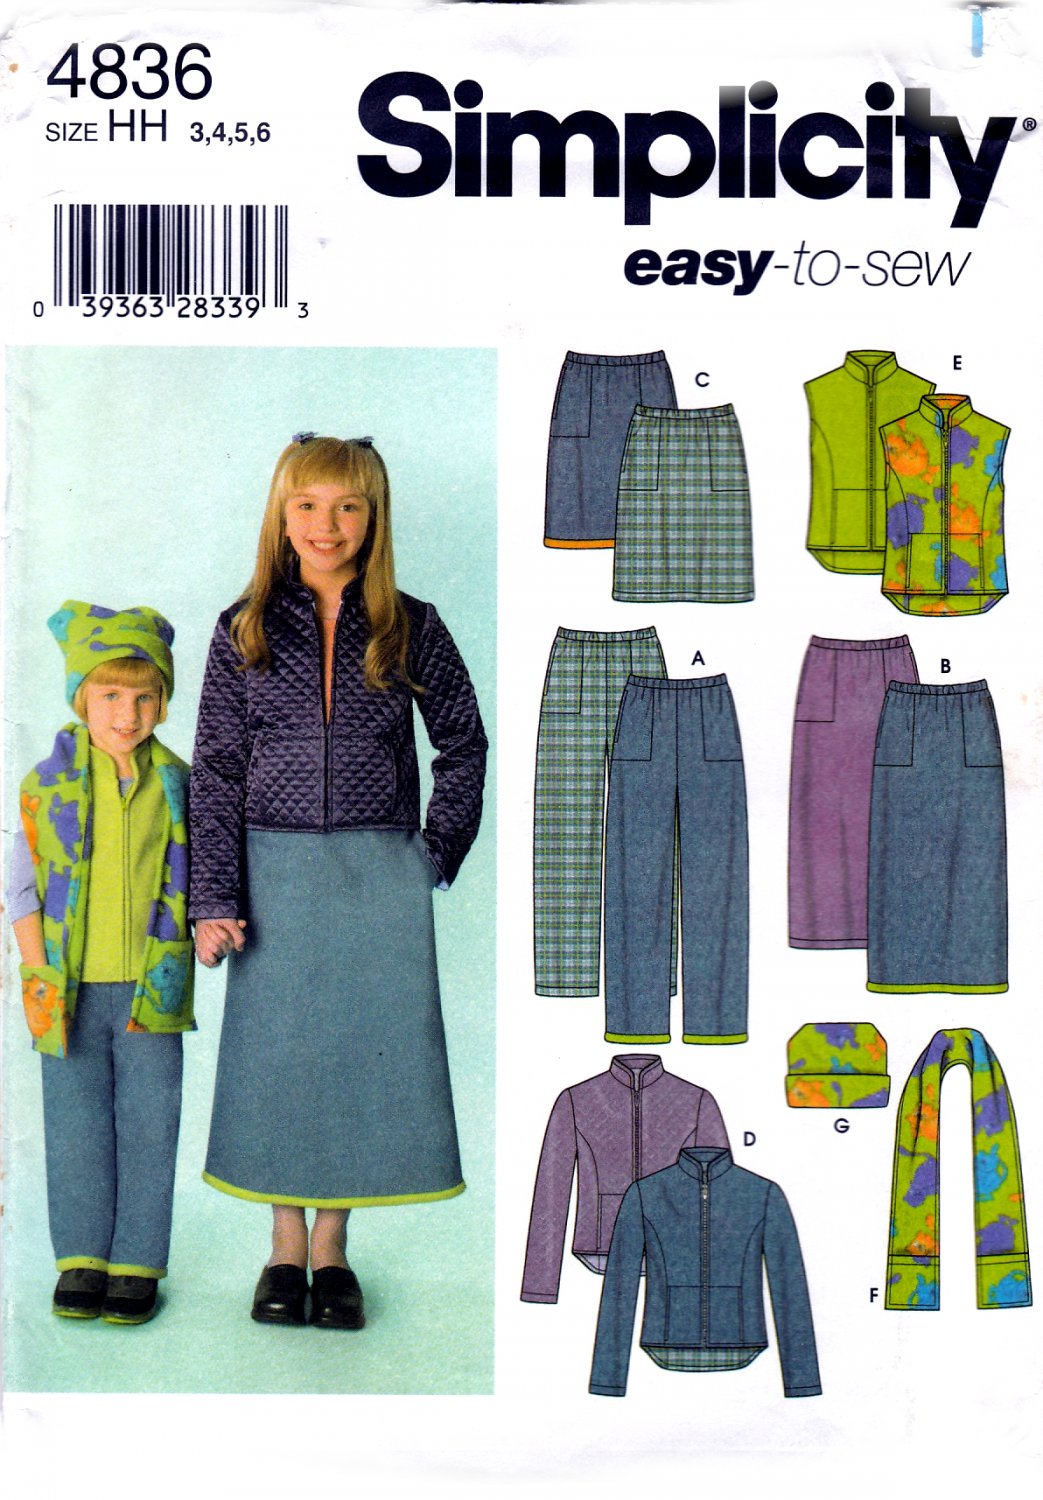 Simplicity 4836 Girls Pants Skirt Jacket or Vest Scarf Hat Sewing Pattern Sizes 3-4-5-6